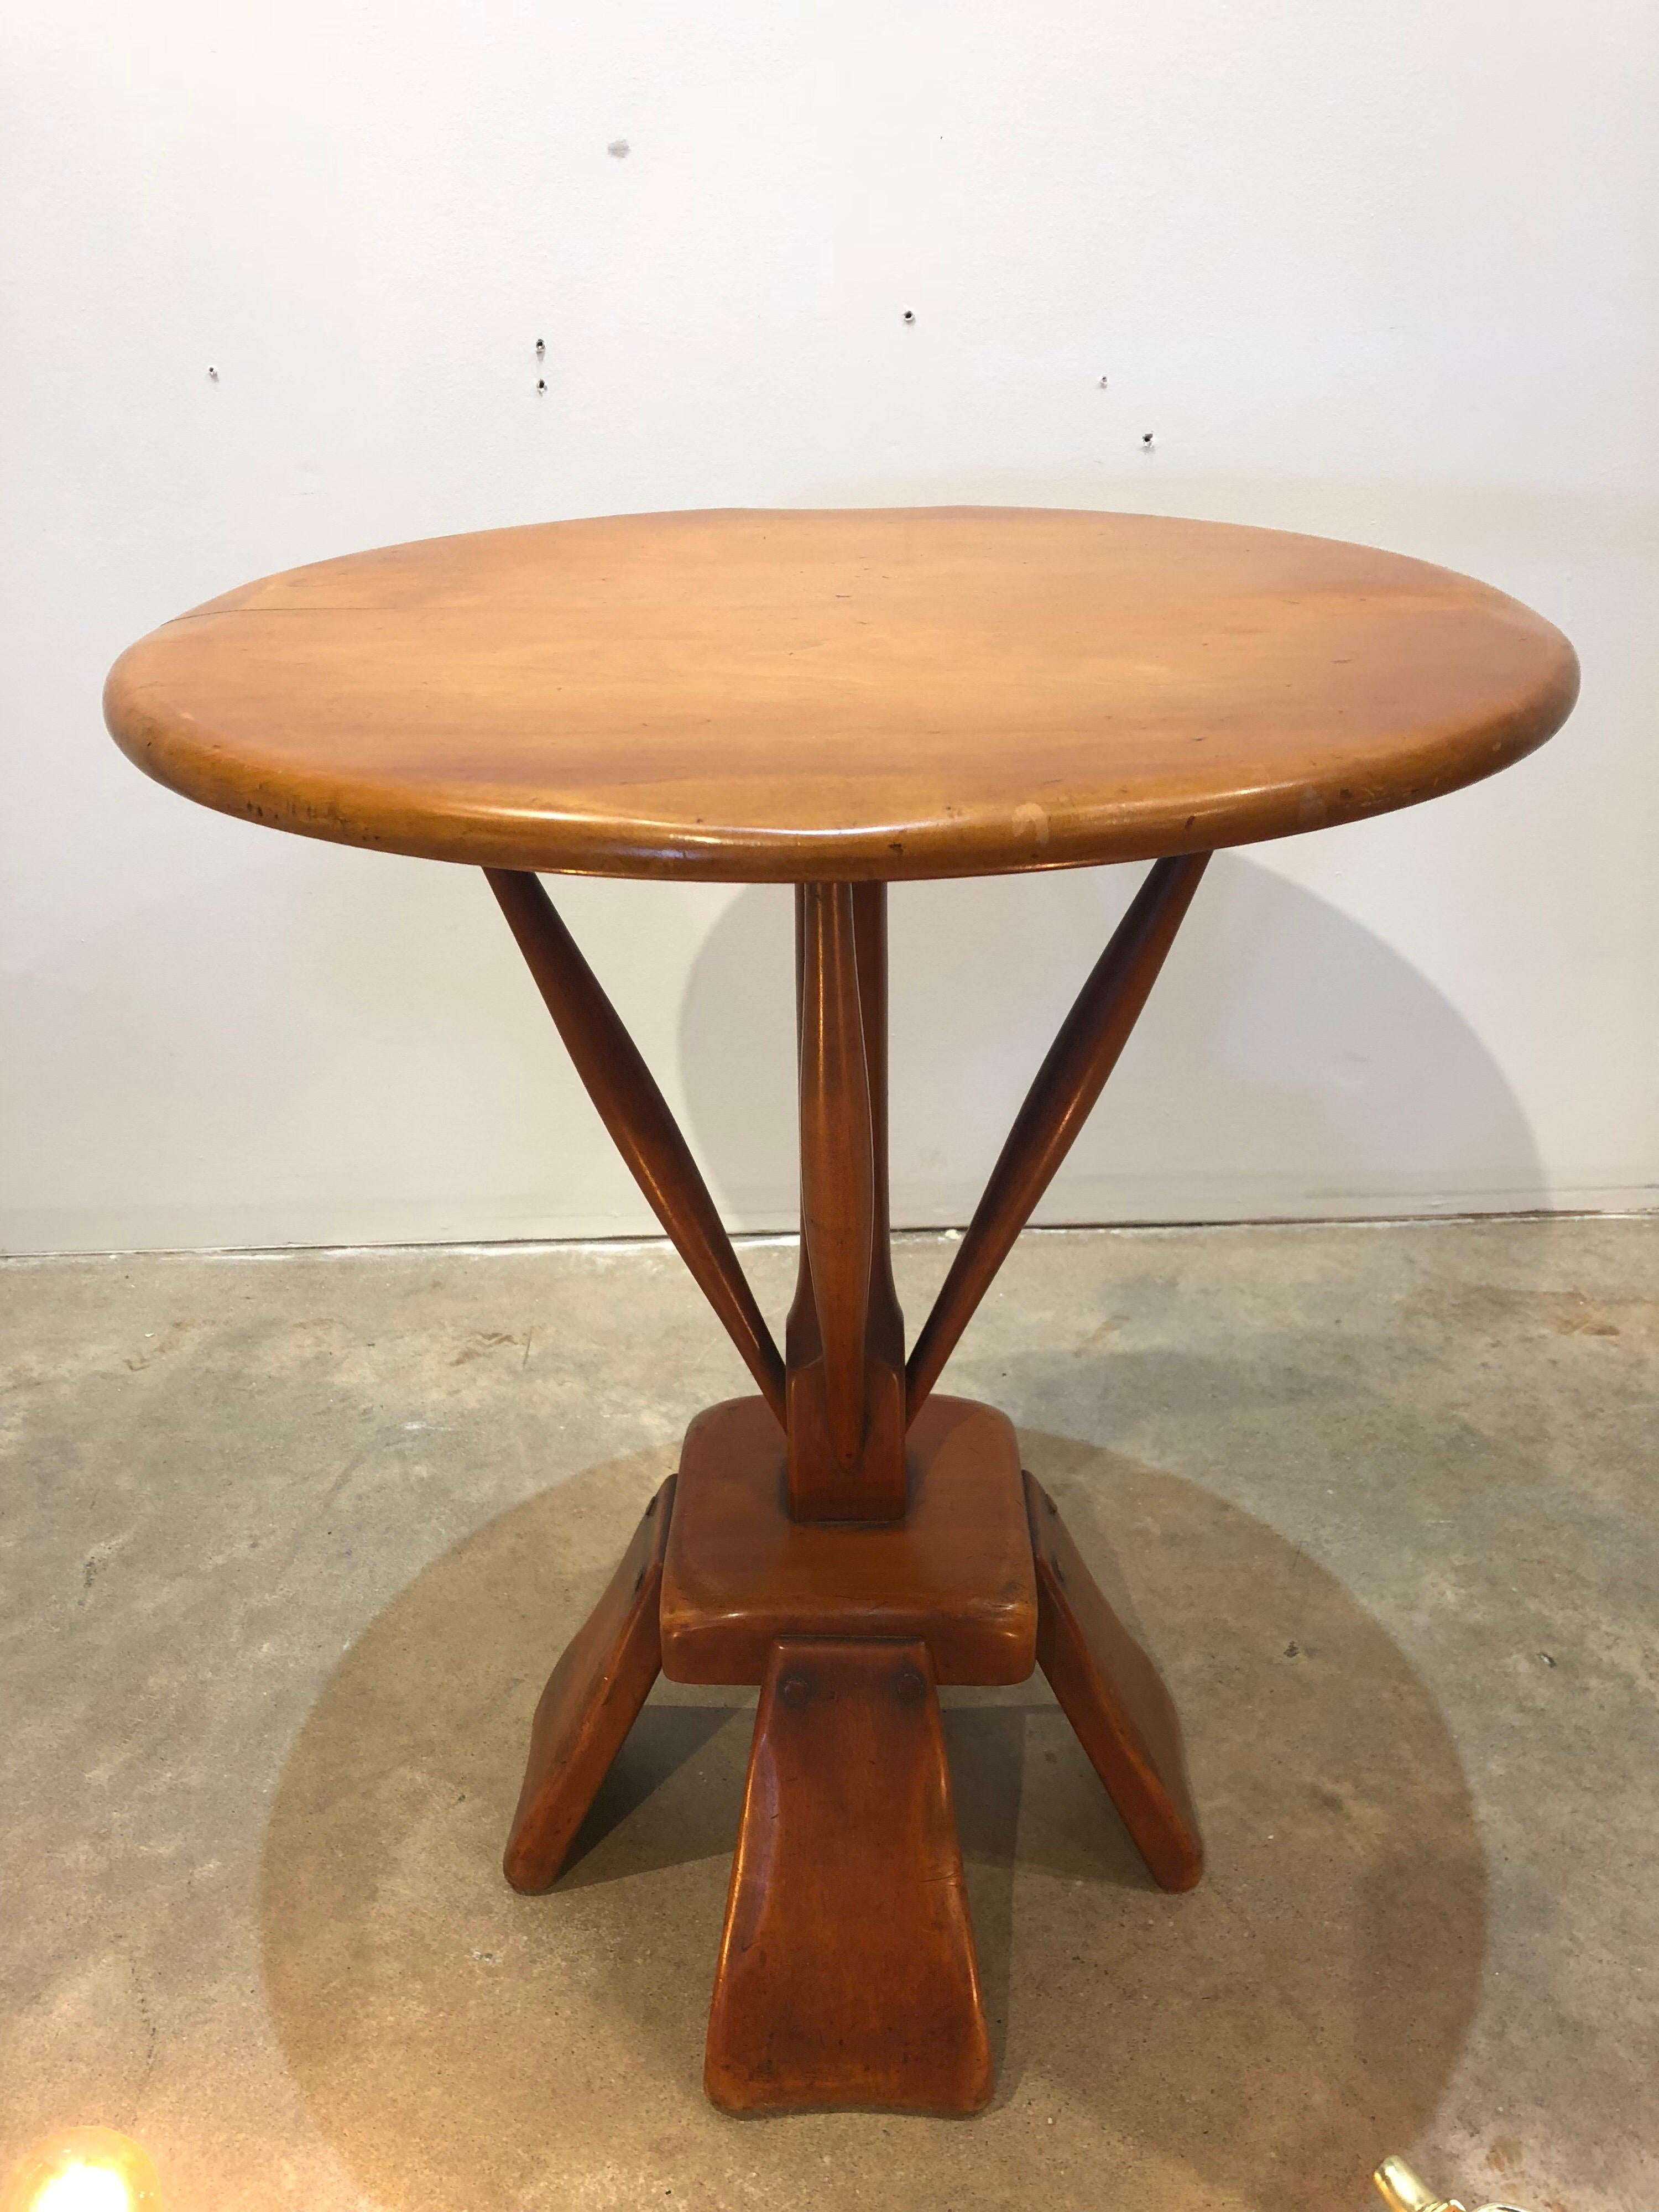 Stylish Midcentury Accent Wood Table In Good Condition For Sale In Chicago, IL